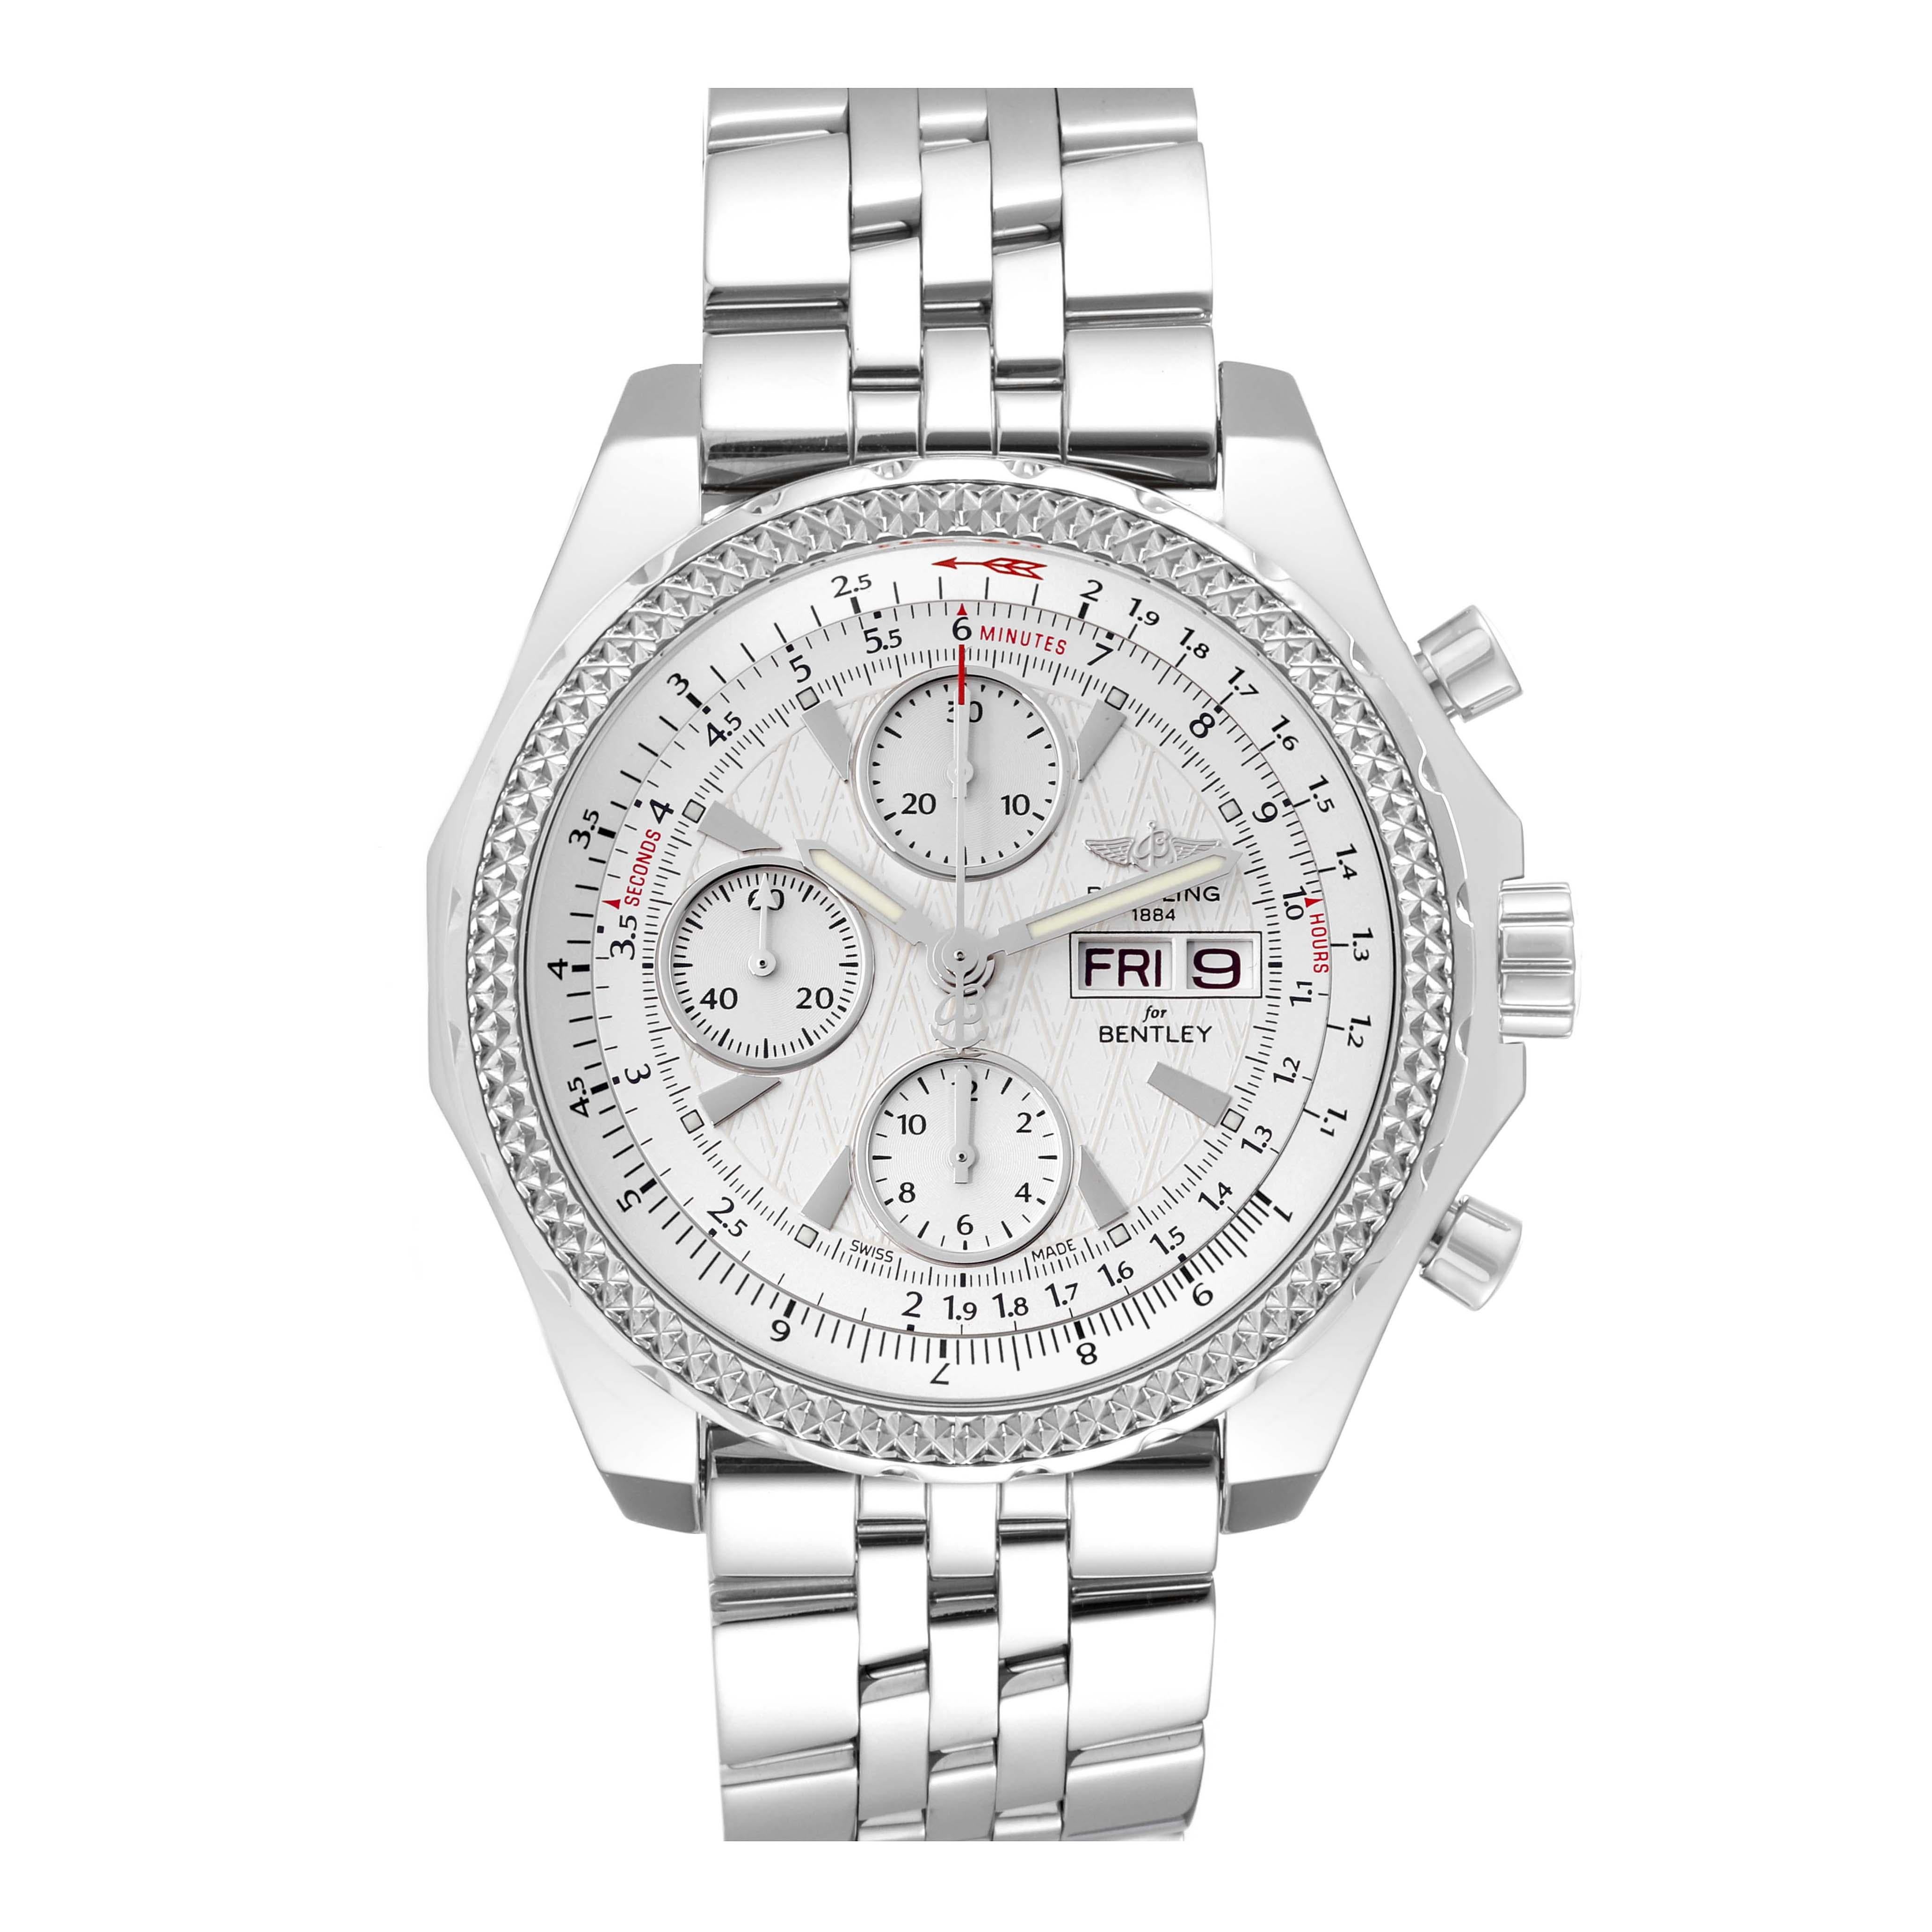 Breitling Bentley Motors GT White Dial Chronograph Steel Mens Watch A13362. Self-winding automatic officially certified chronometer movement. Chronograph function. Stainless steel case 44.8 mm in diameter. Stainless steel pushers and screw-down